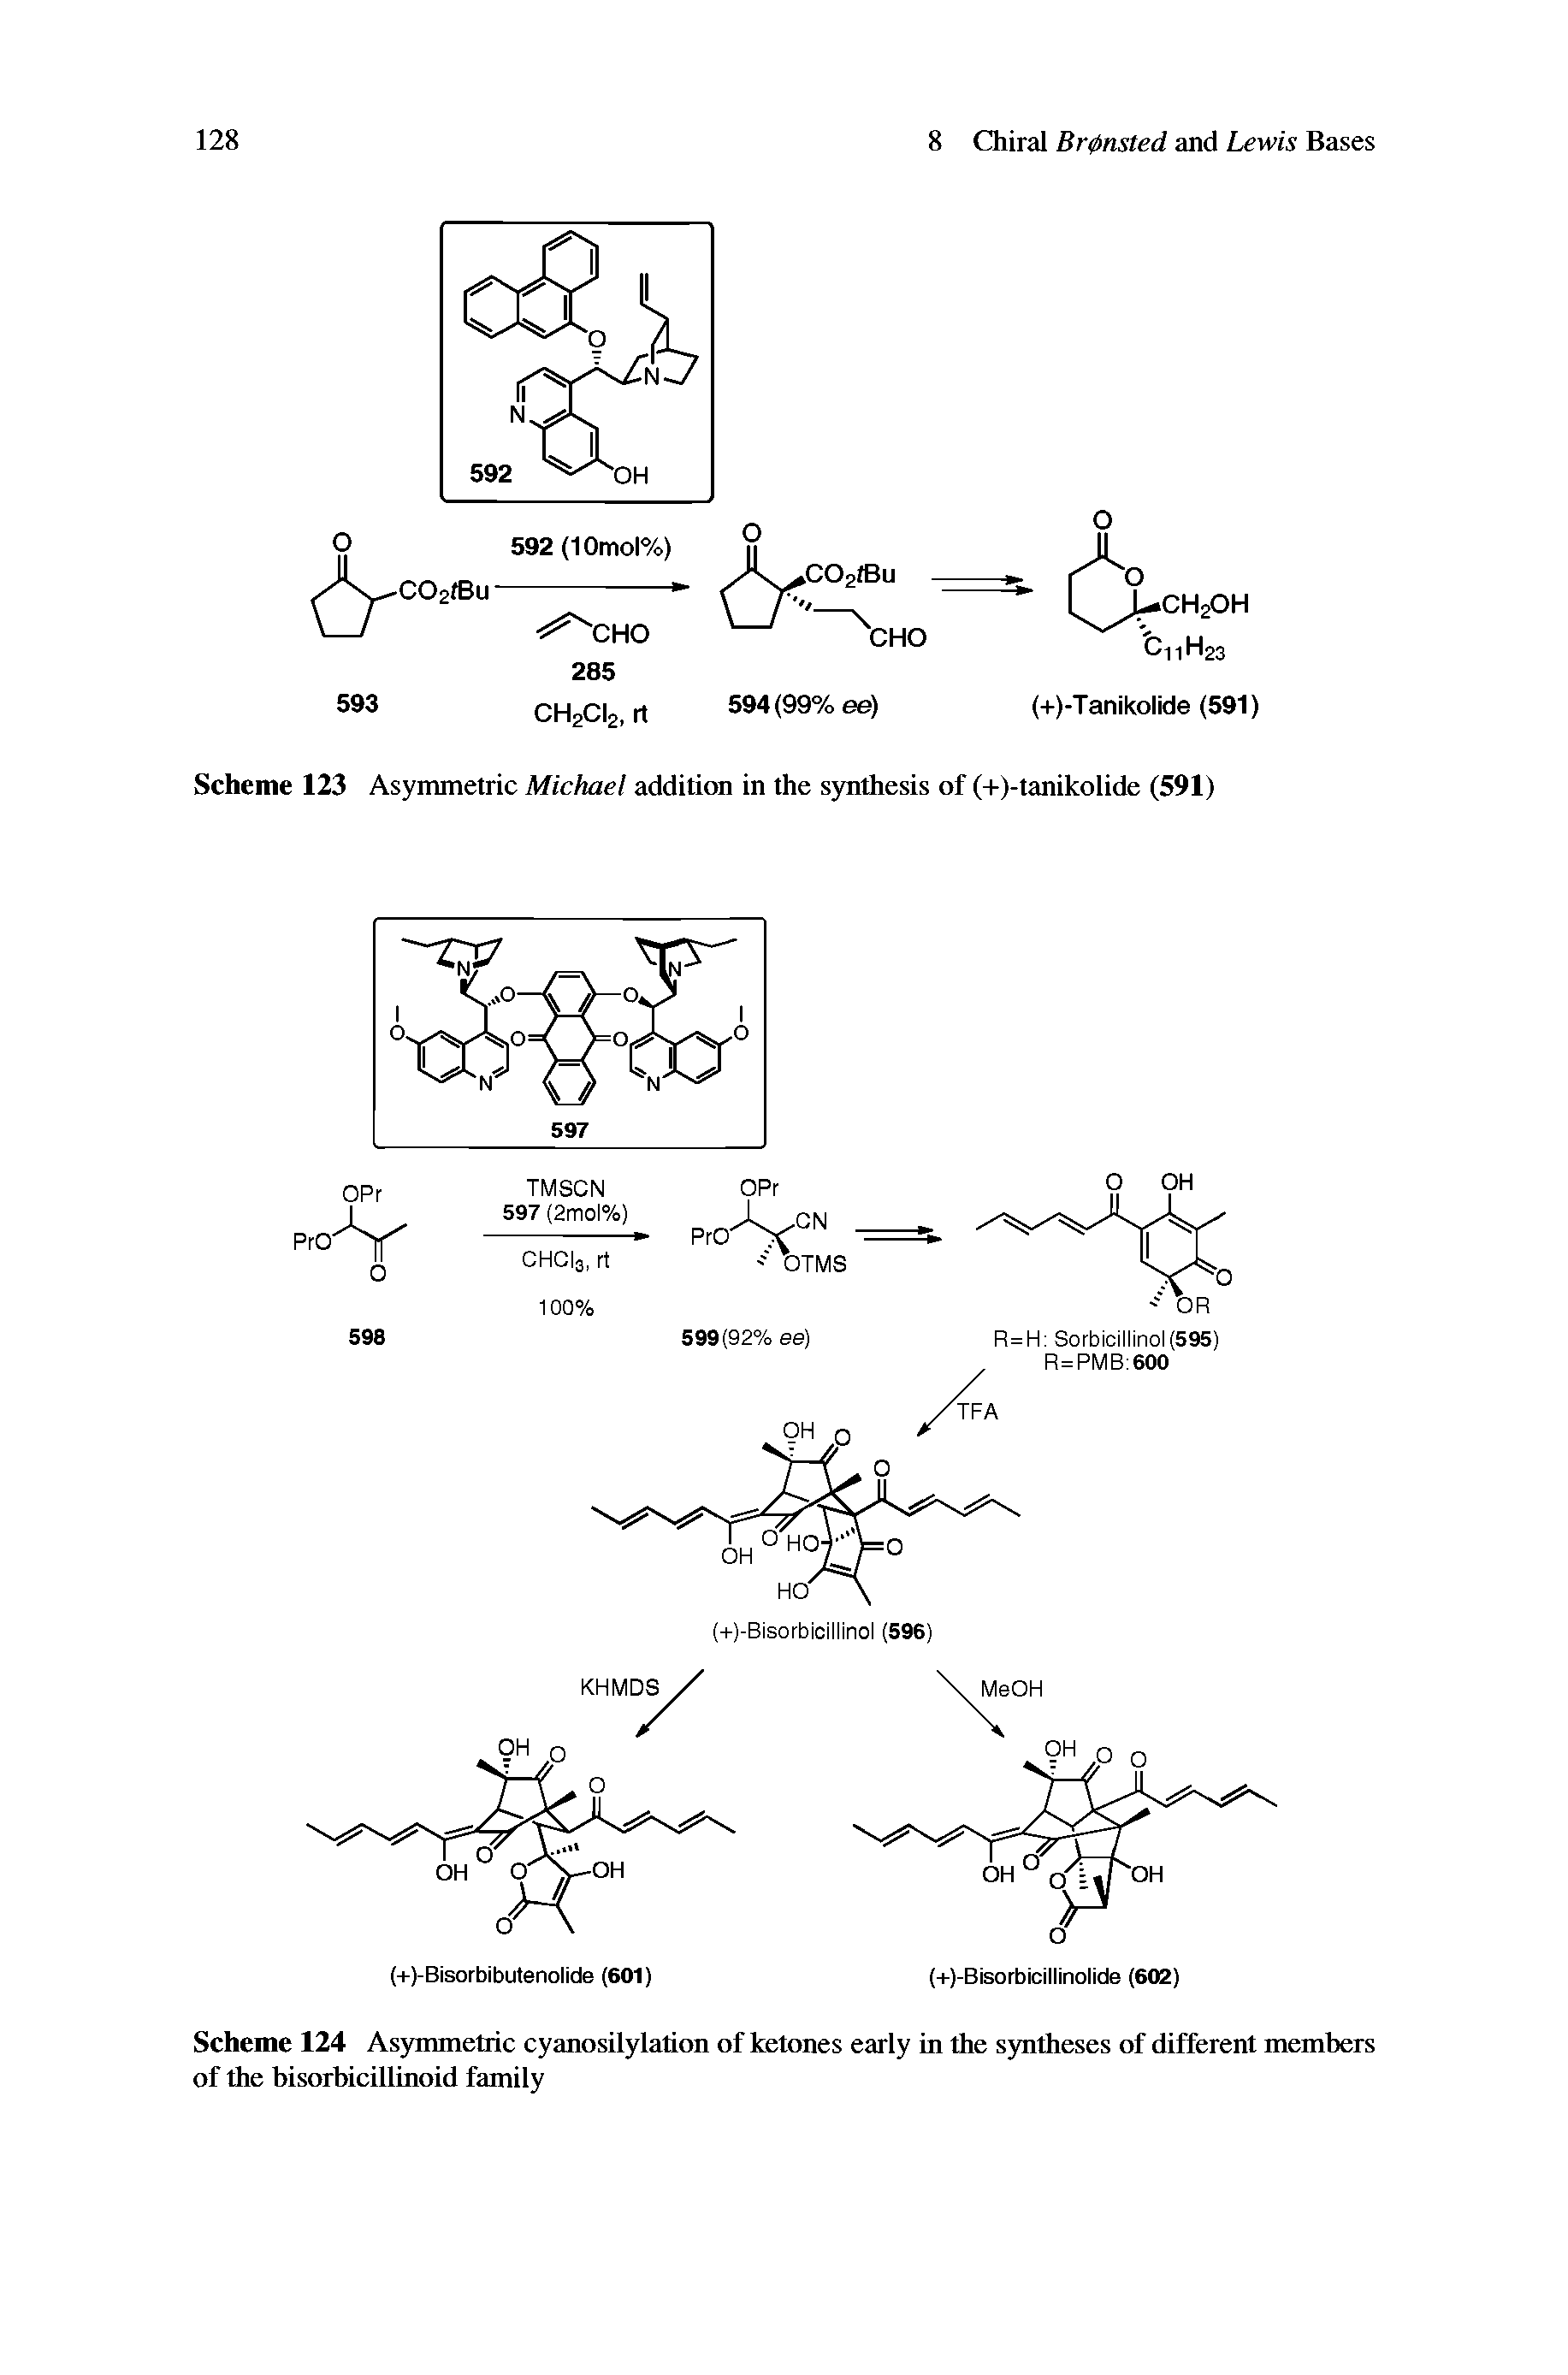 Scheme 124 Asymmetric cyanosilylation of ketones early in the syntheses of different members of the bisorbicillinoid family...